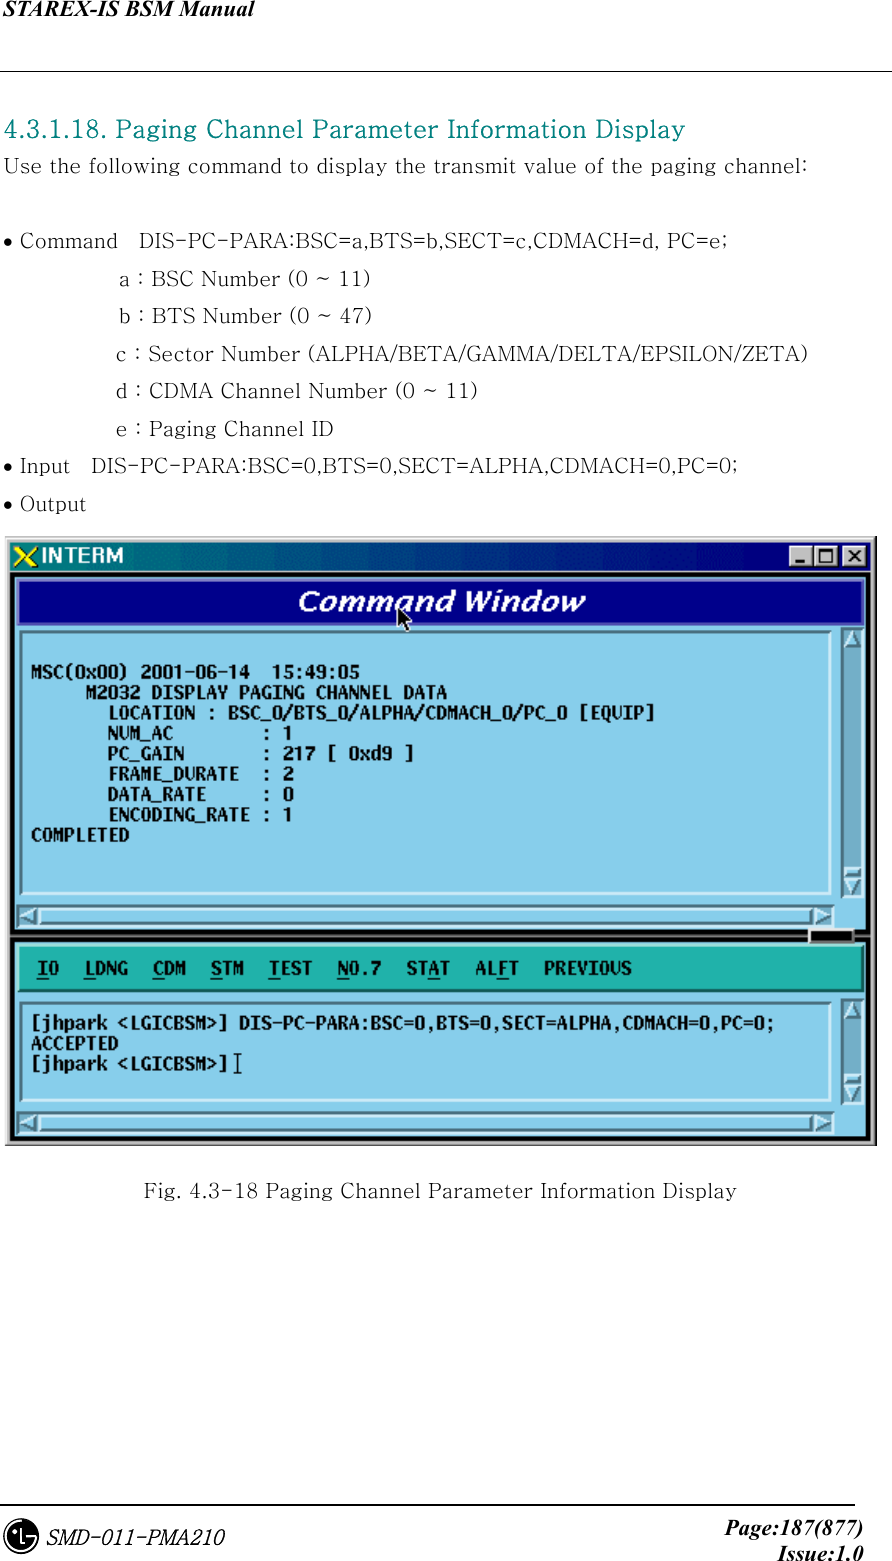 STAREX-IS BSM Manual     Page:187(877)Issue:1.0SMD-011-PMA210  4.3.1.18. Paging Channel Parameter Information Display Use the following command to display the transmit value of the paging channel:  • Command    DIS-PC-PARA:BSC=a,BTS=b,SECT=c,CDMACH=d, PC=e;            a : BSC Number (0 ~ 11)            b : BTS Number (0 ~ 47) c : Sector Number (ALPHA/BETA/GAMMA/DELTA/EPSILON/ZETA) d : CDMA Channel Number (0 ~ 11) e : Paging Channel ID • Input    DIS-PC-PARA:BSC=0,BTS=0,SECT=ALPHA,CDMACH=0,PC=0; • Output  Fig. 4.3-18 Paging Channel Parameter Information Display 